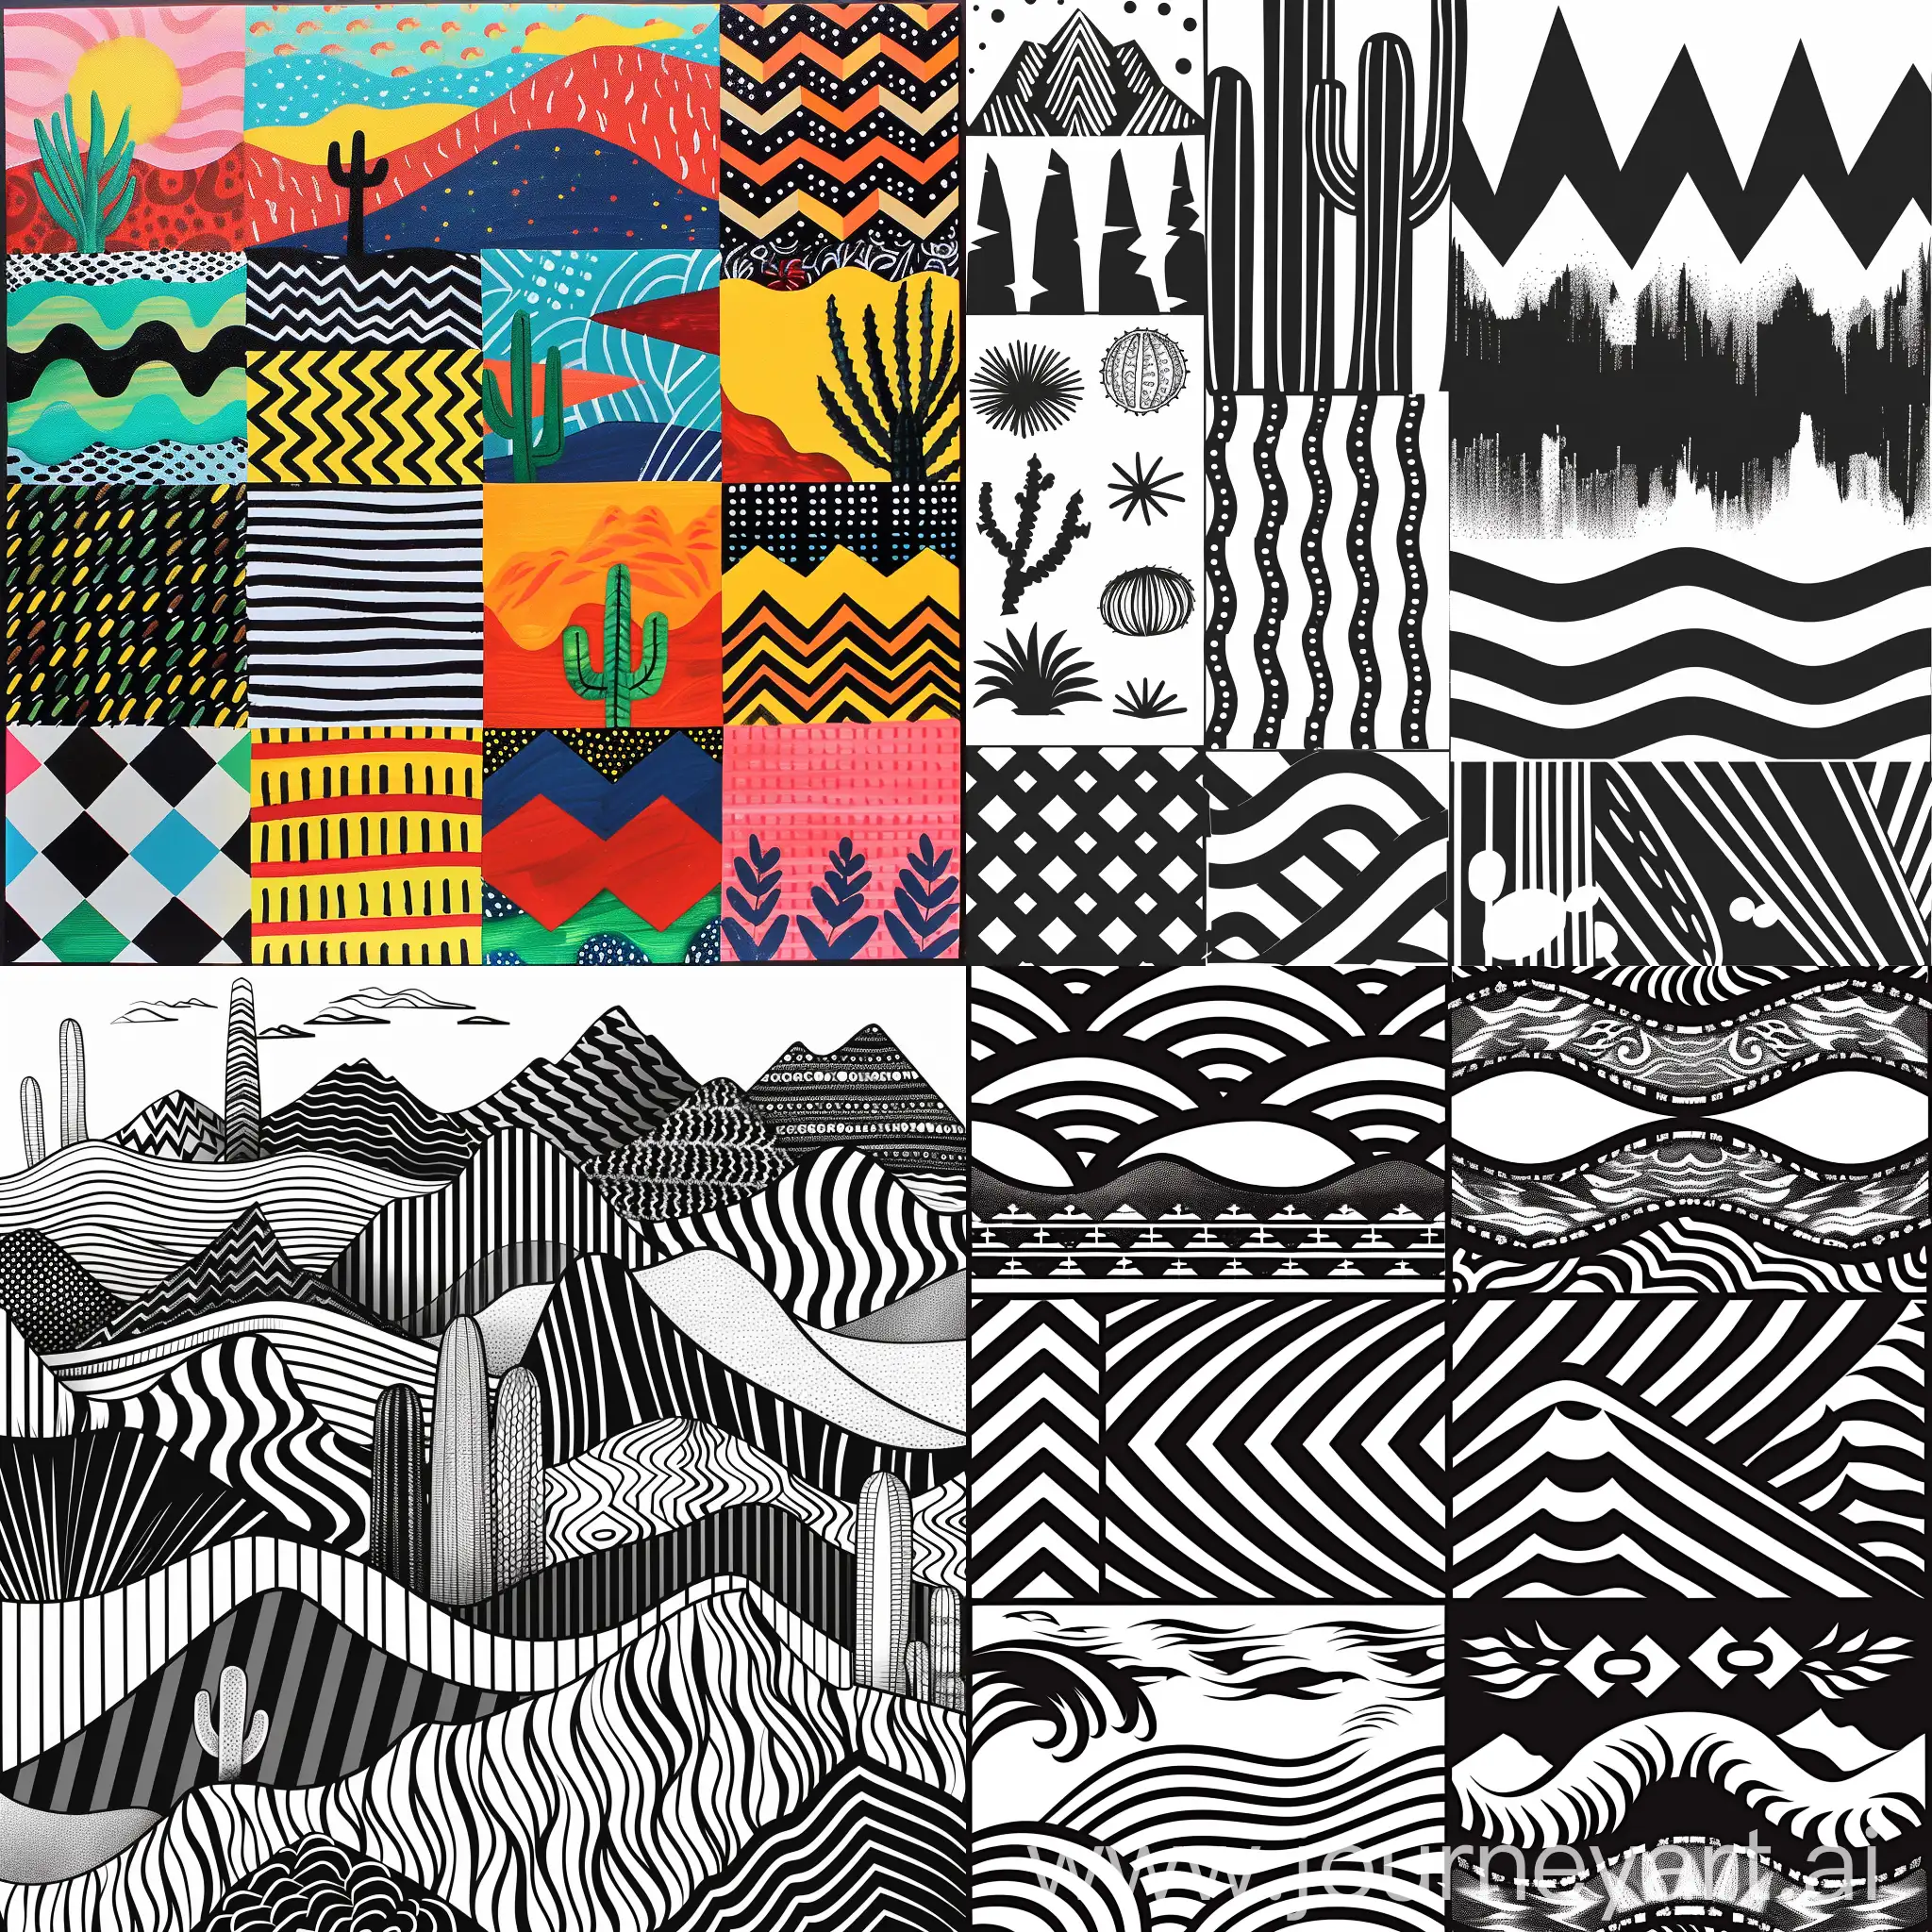 Do a geometric pattern using waves and other patterns that can depict deserts, The patterns should be simple, suggest more than 4 patterns, the patterns should be easy to replicate, the designs should be good to do on a banK note